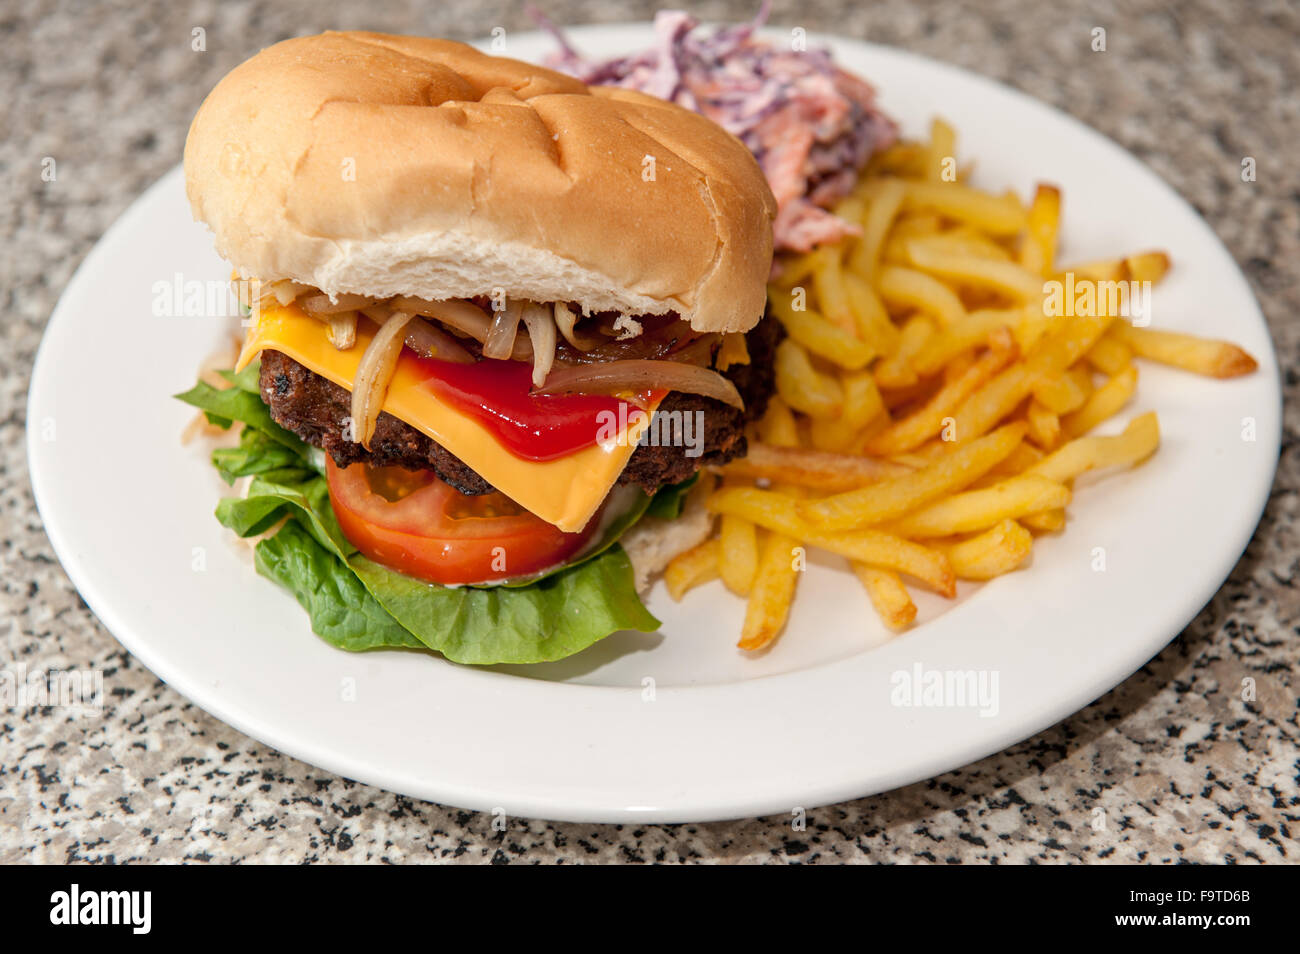 Home made beef burger in bun meal Stock Photo